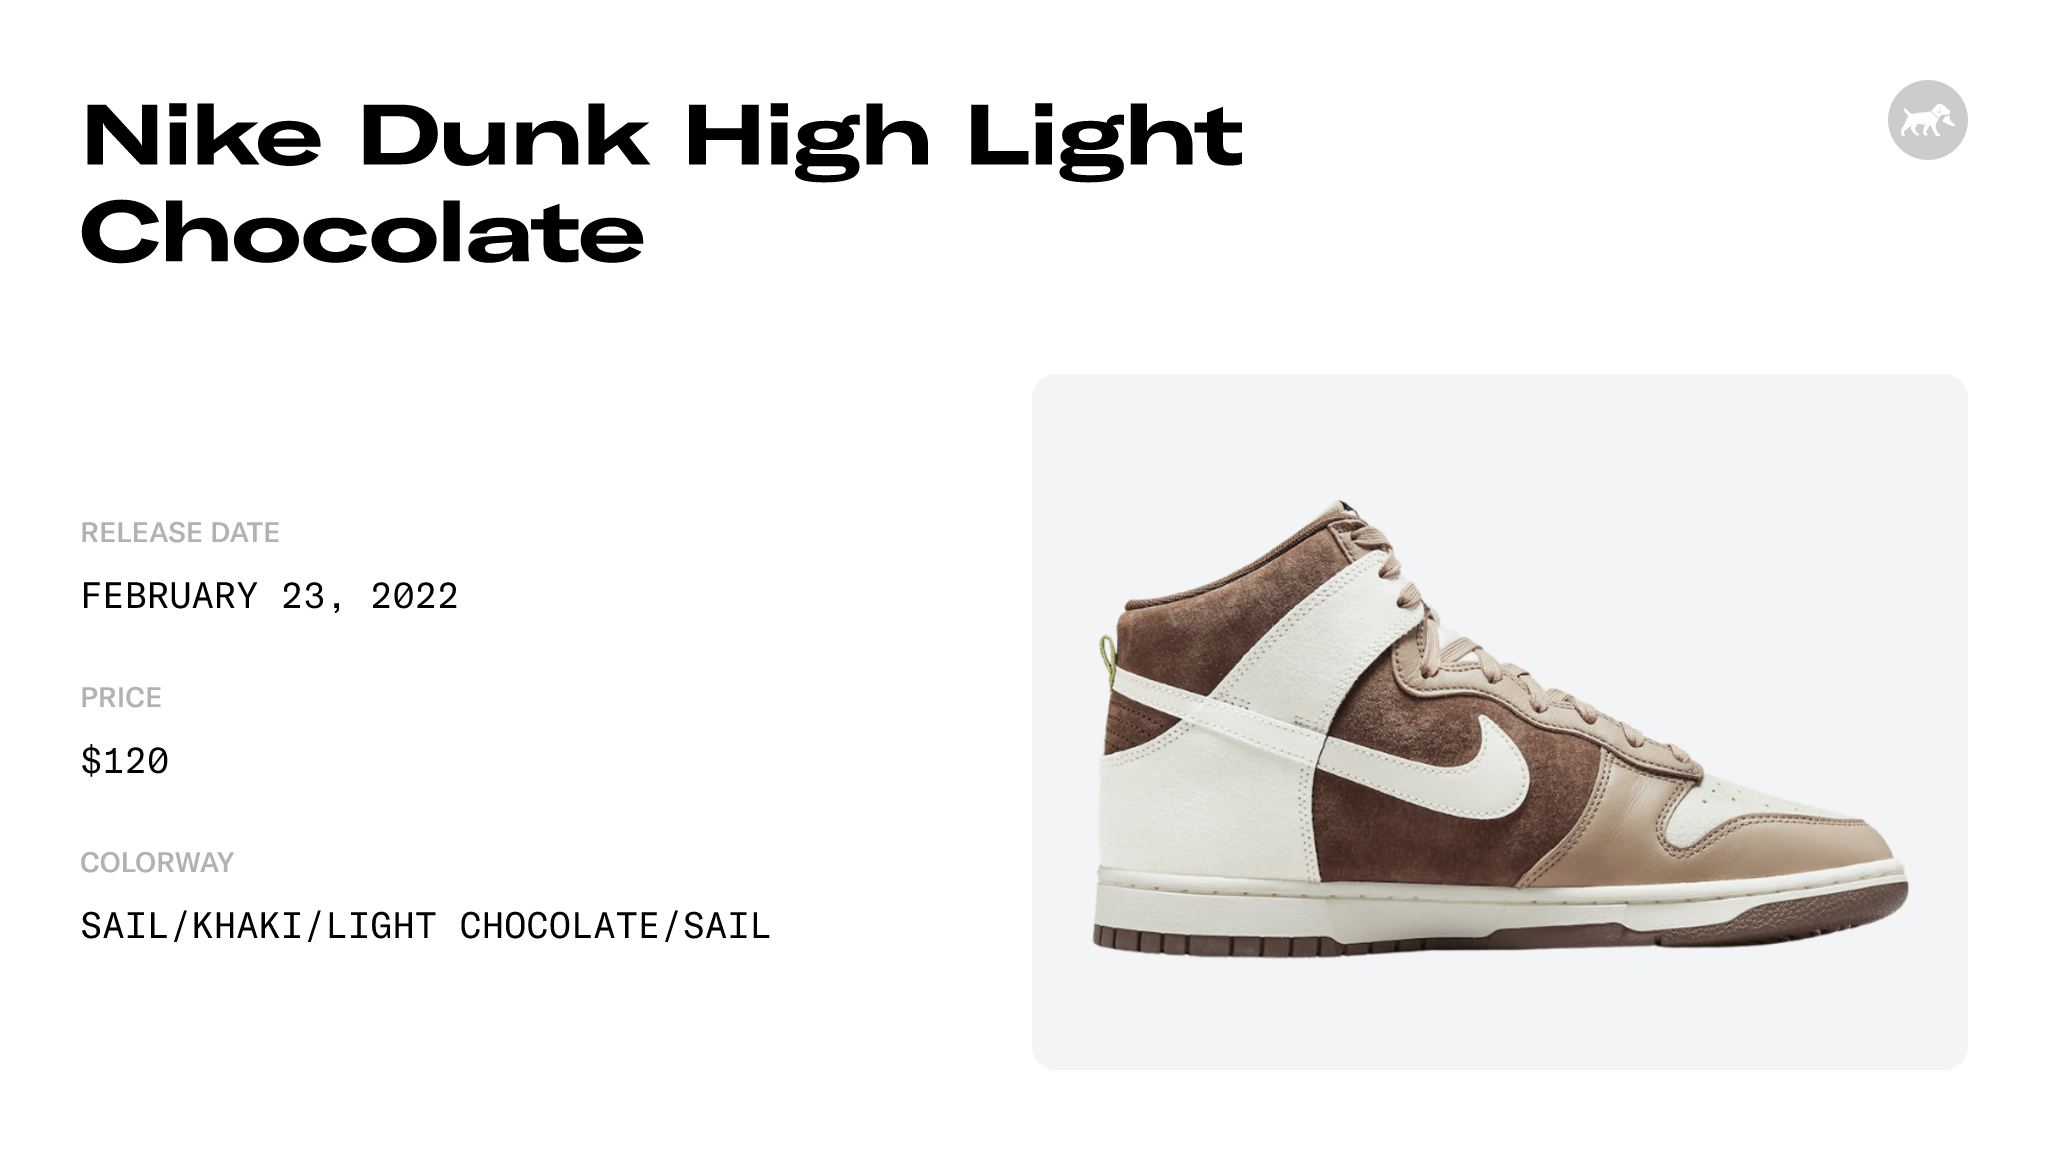 Nike Dunk High Light Chocolate - DH5348-100 Raffles and Release Date